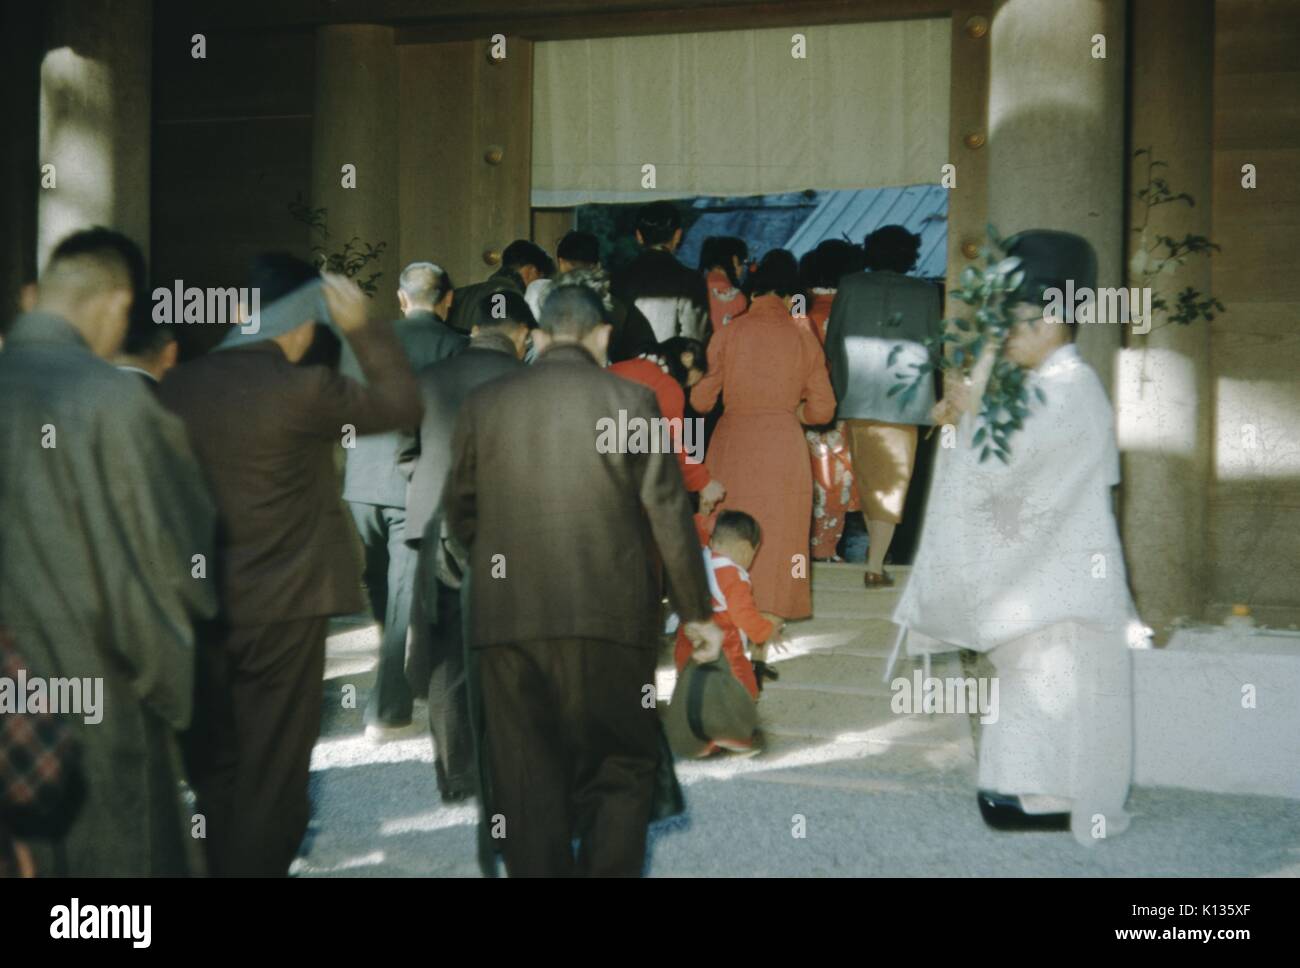 Japanese churchgoers with bowed heads and modest clothing walking in a line and entering a church, Japan, 1951. Stock Photo